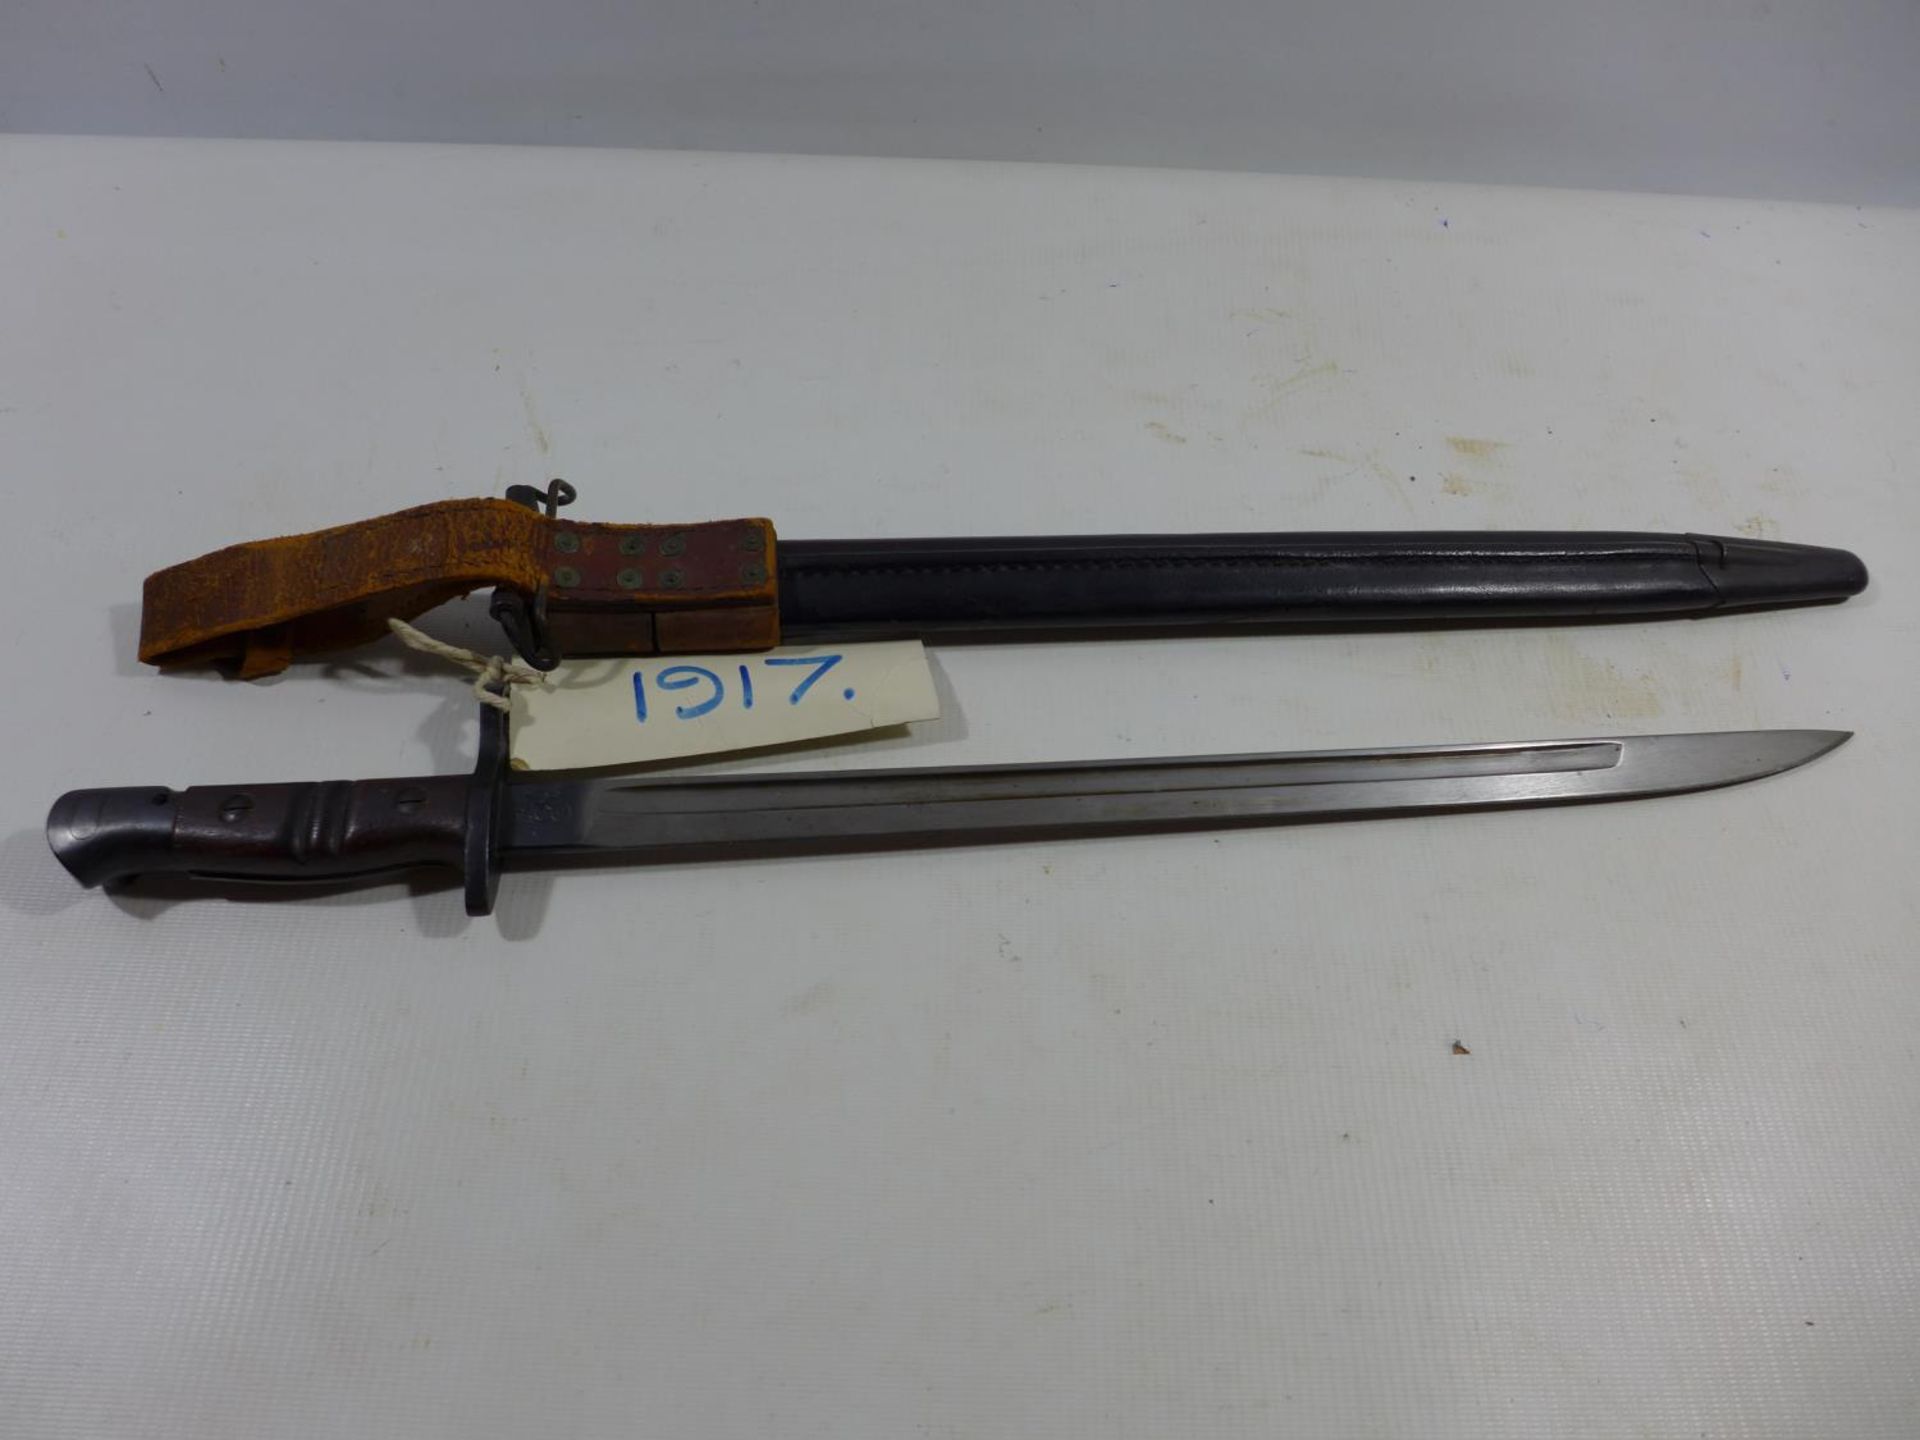 A WORLD WAR I UNITED STATES REMINGTON BAYONET AND SCABBARD, 43CM BLADE, DATED 1917 - Image 2 of 6